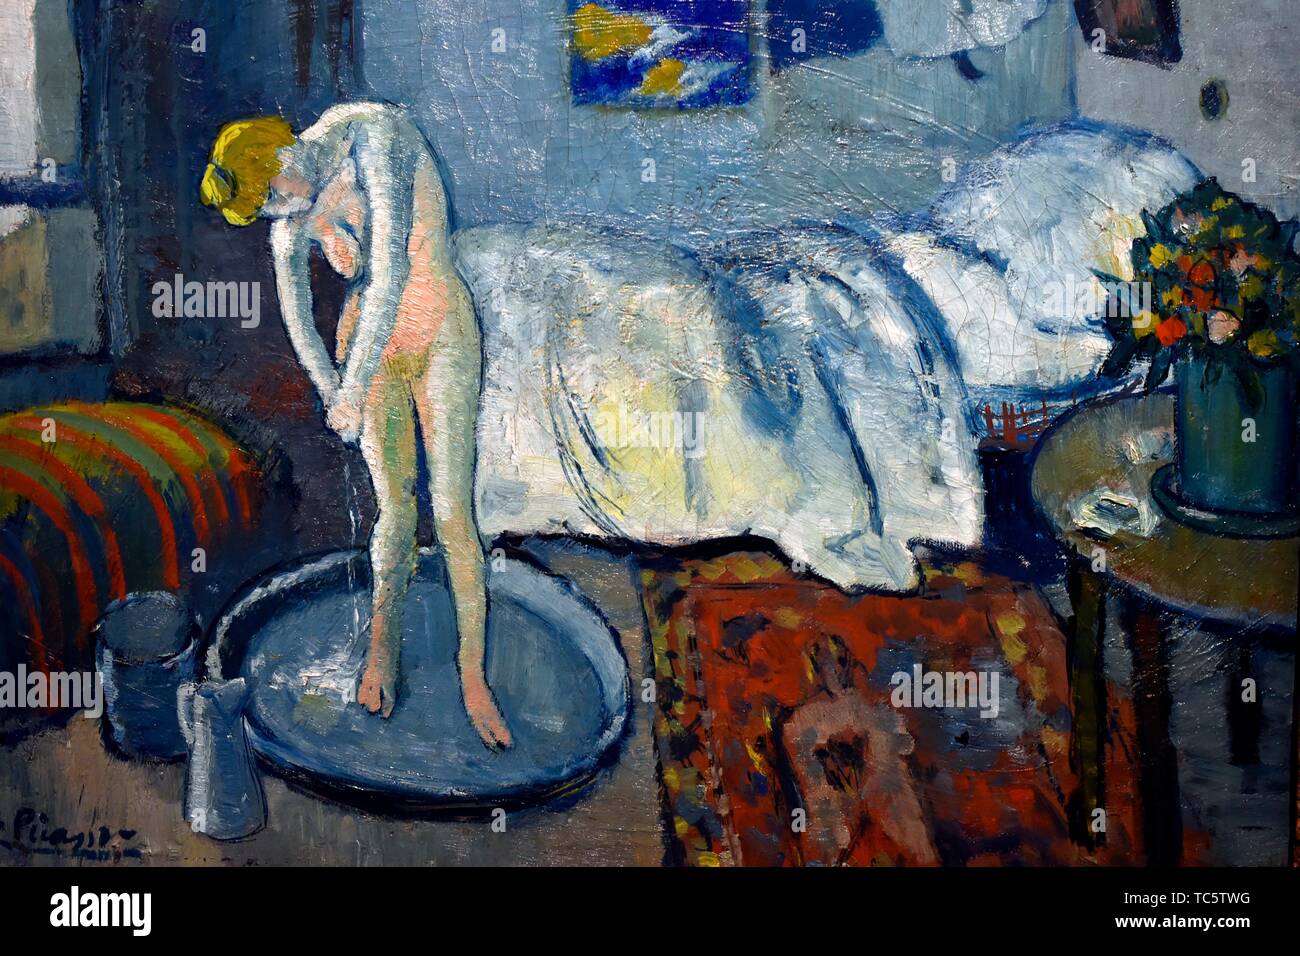 The Blue Room, 1901, oil on canvas, a painting by Pablo Picasso, the Philipps Collection of Washington, USA. Stock Photo